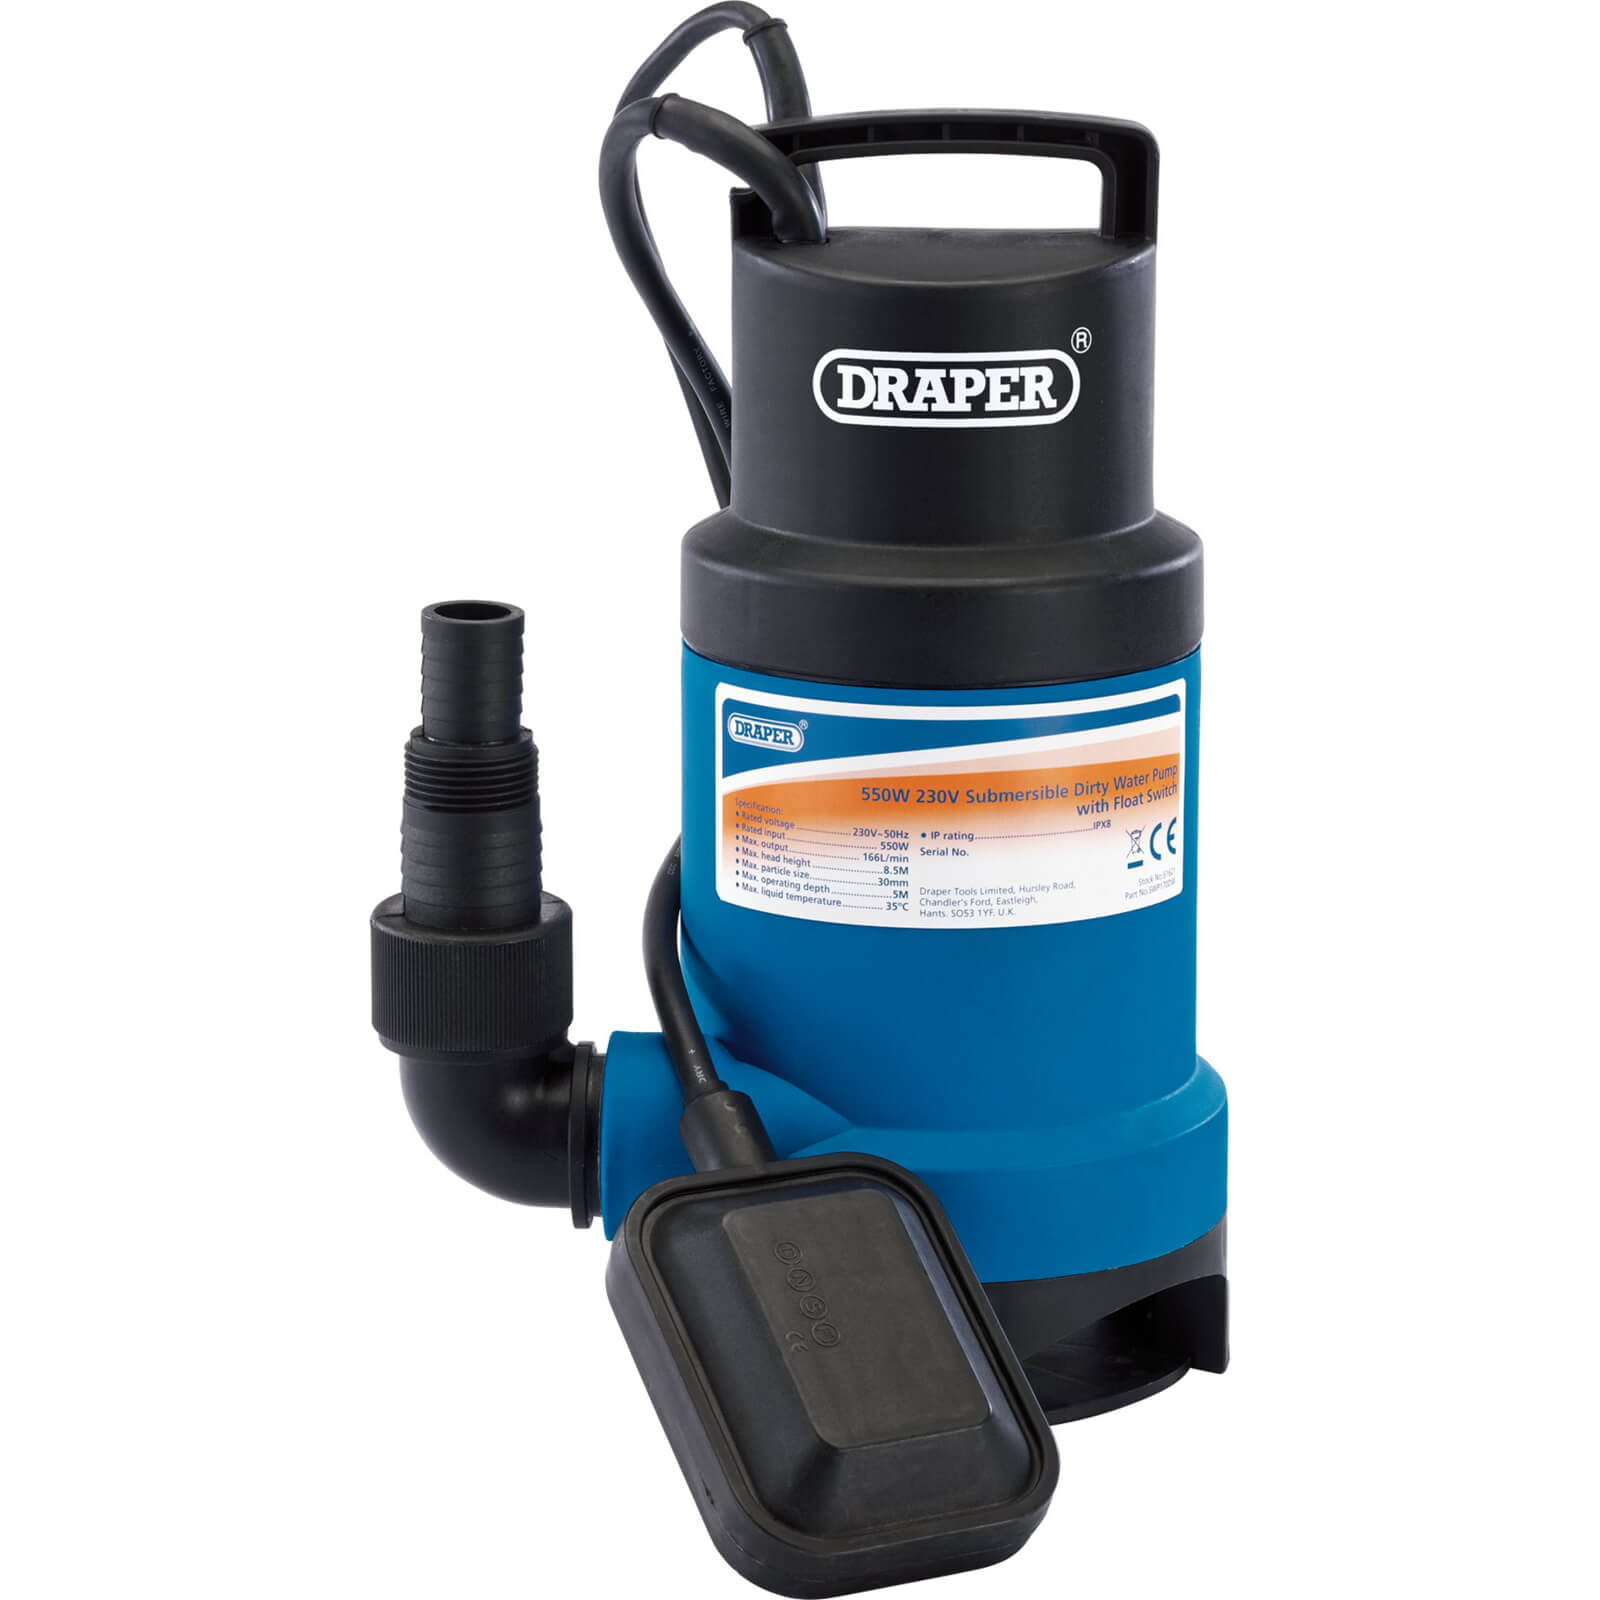 Image of Draper SWP170DW Submersible Dirty Water Pump 240v